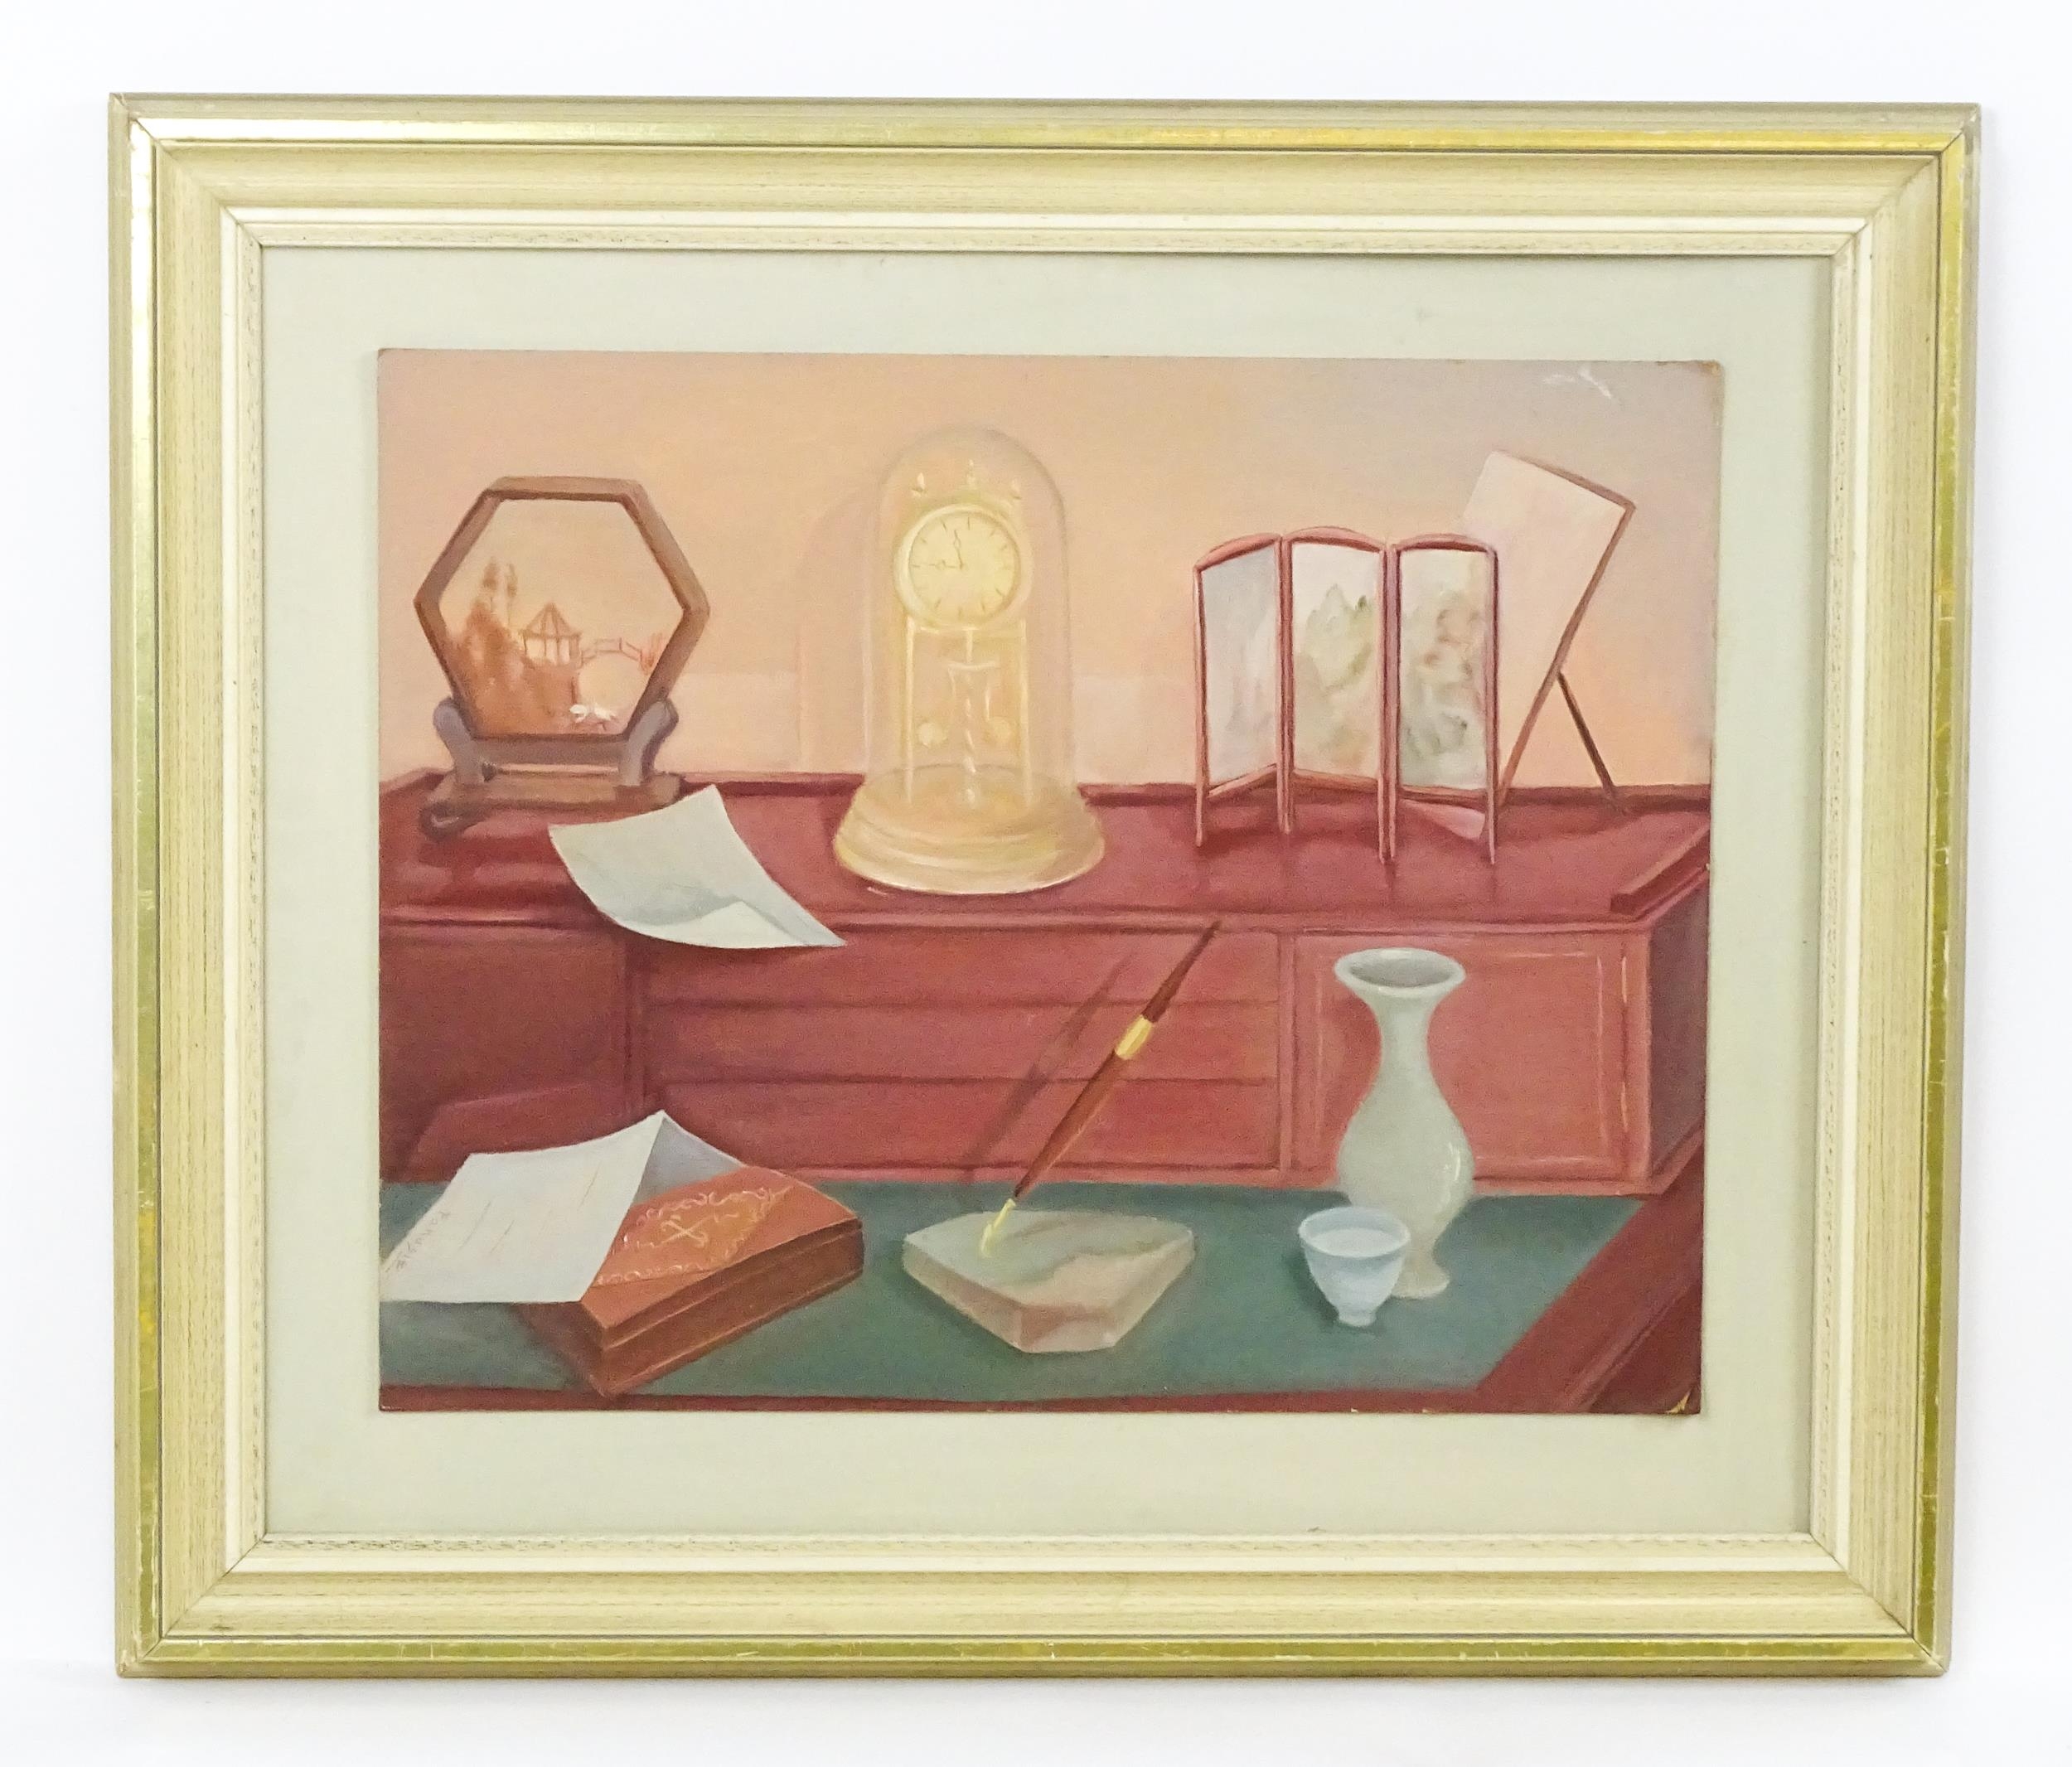 Fanusie, 21st century, Oil on board, A Still Life in Pink, A study of a desk with skeleton clock,